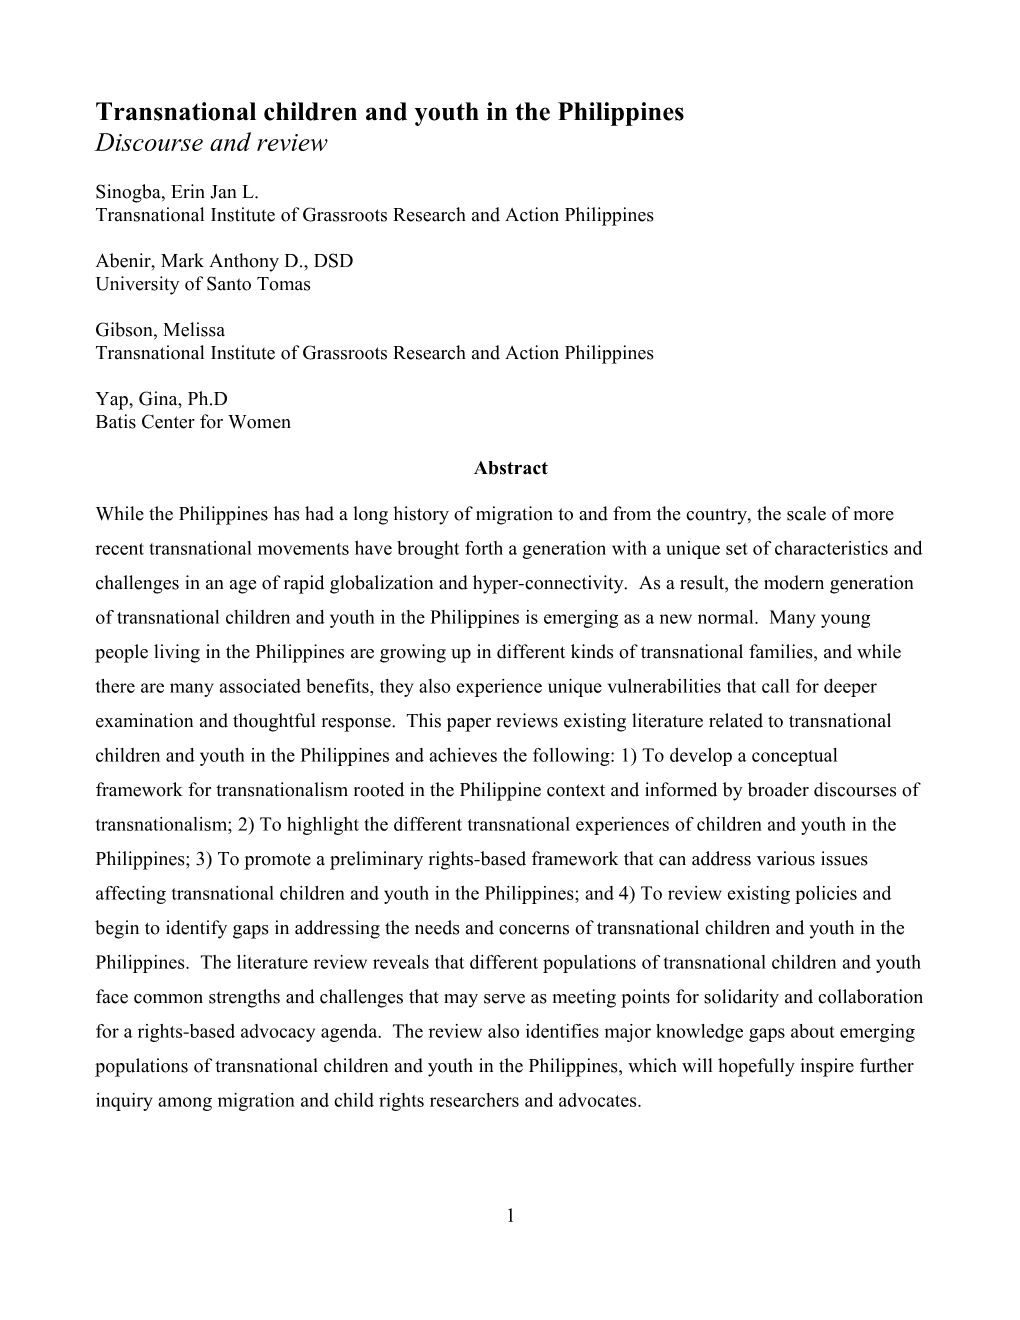 Transnational Children and Youth in the Philippines Discourse and Review